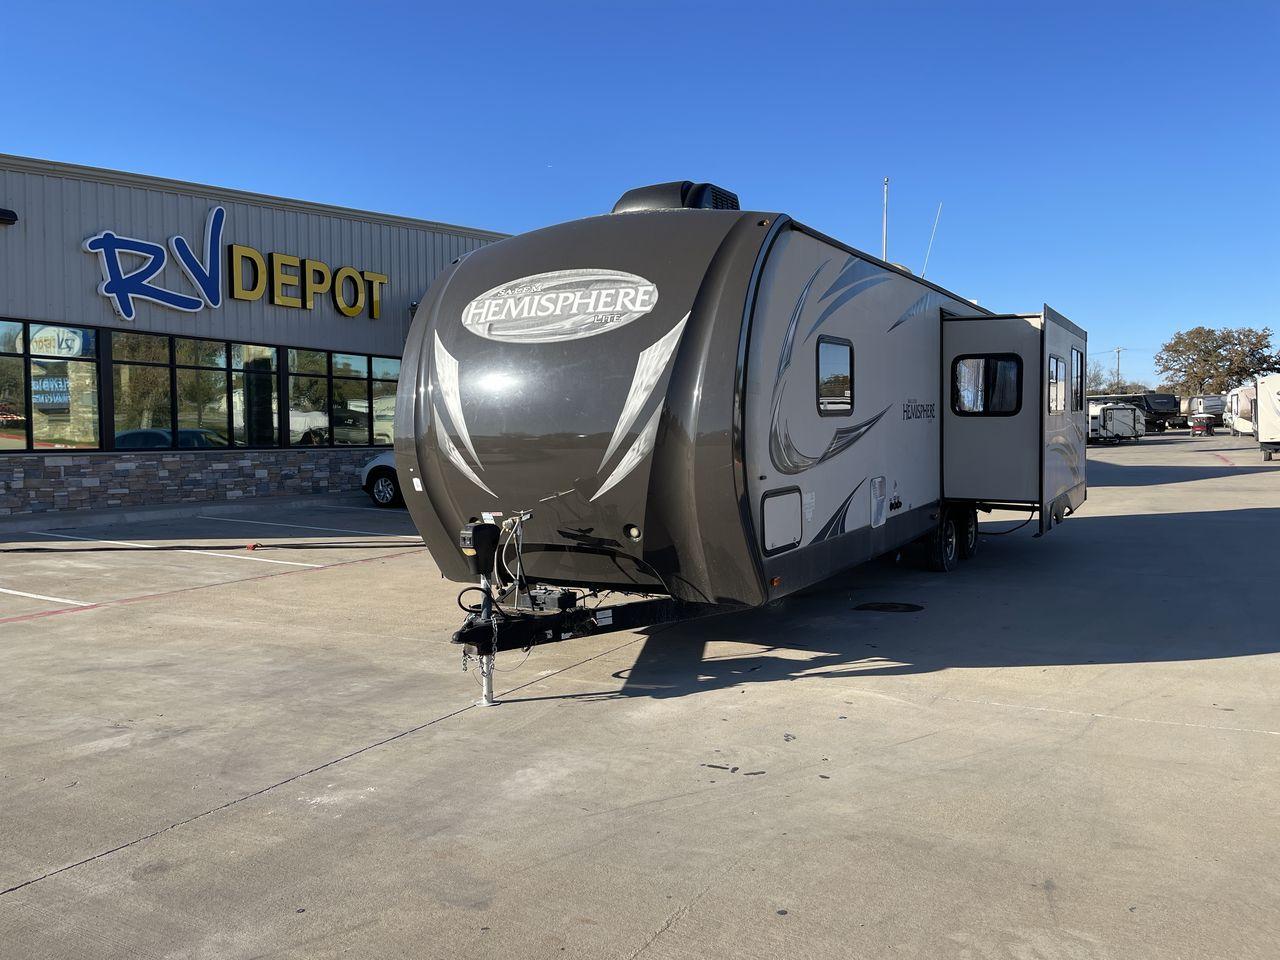 2014 TAN FOREST RIVER HEMISPHERE 282RK (4X4TSBD2XEU) , Length: 35 ft. | Dry Weight: 6,620 lbs | Gross Weight: 8,521 lbs. | Slides: 1 transmission, located at 4319 N Main Street, Cleburne, TX, 76033, (817) 221-0660, 32.435829, -97.384178 - The 2014 Forest River Hemisphere 282RK is a great travel trailer that is made to make your outdoor activities more comfortable and easy. This 35-foot trailer has a dry weight of 6,620 pounds and a gross weight of 8,521 pounds, making it easy to tow and providing plenty of space for all your gear. Th - Photo #0